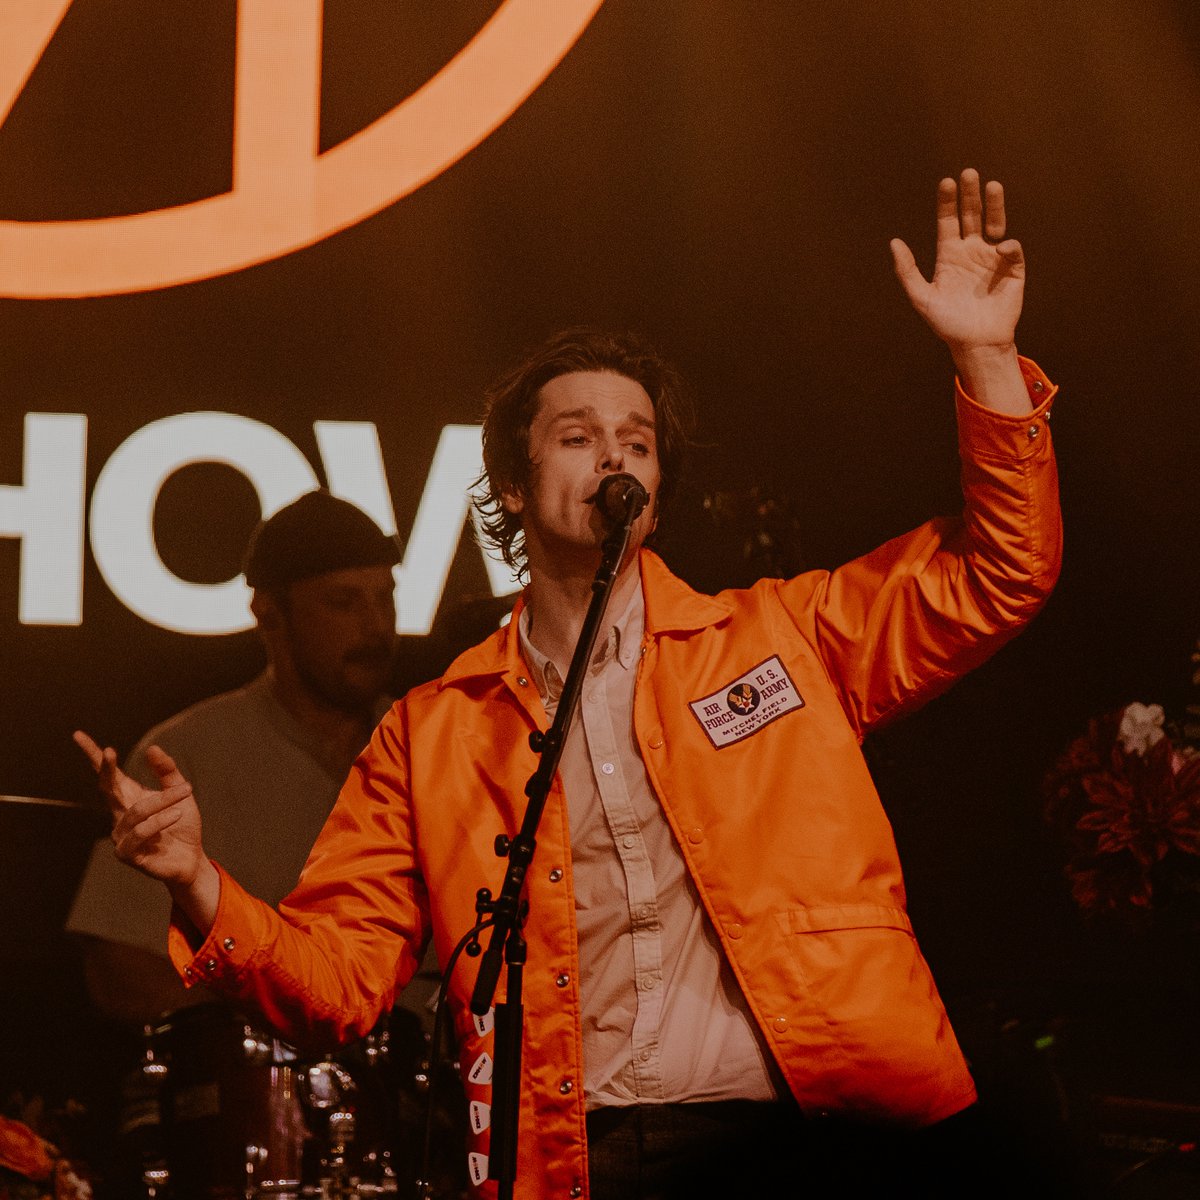 Our latest sick obsession. @iDKHOW brought the Gloomtown Tour to Los Angeles for a sunny good time at the Regent. Check out the full gallery by @verycherrycarla featuring @benchesband on concertupdater.com/#/idkhow-2024/